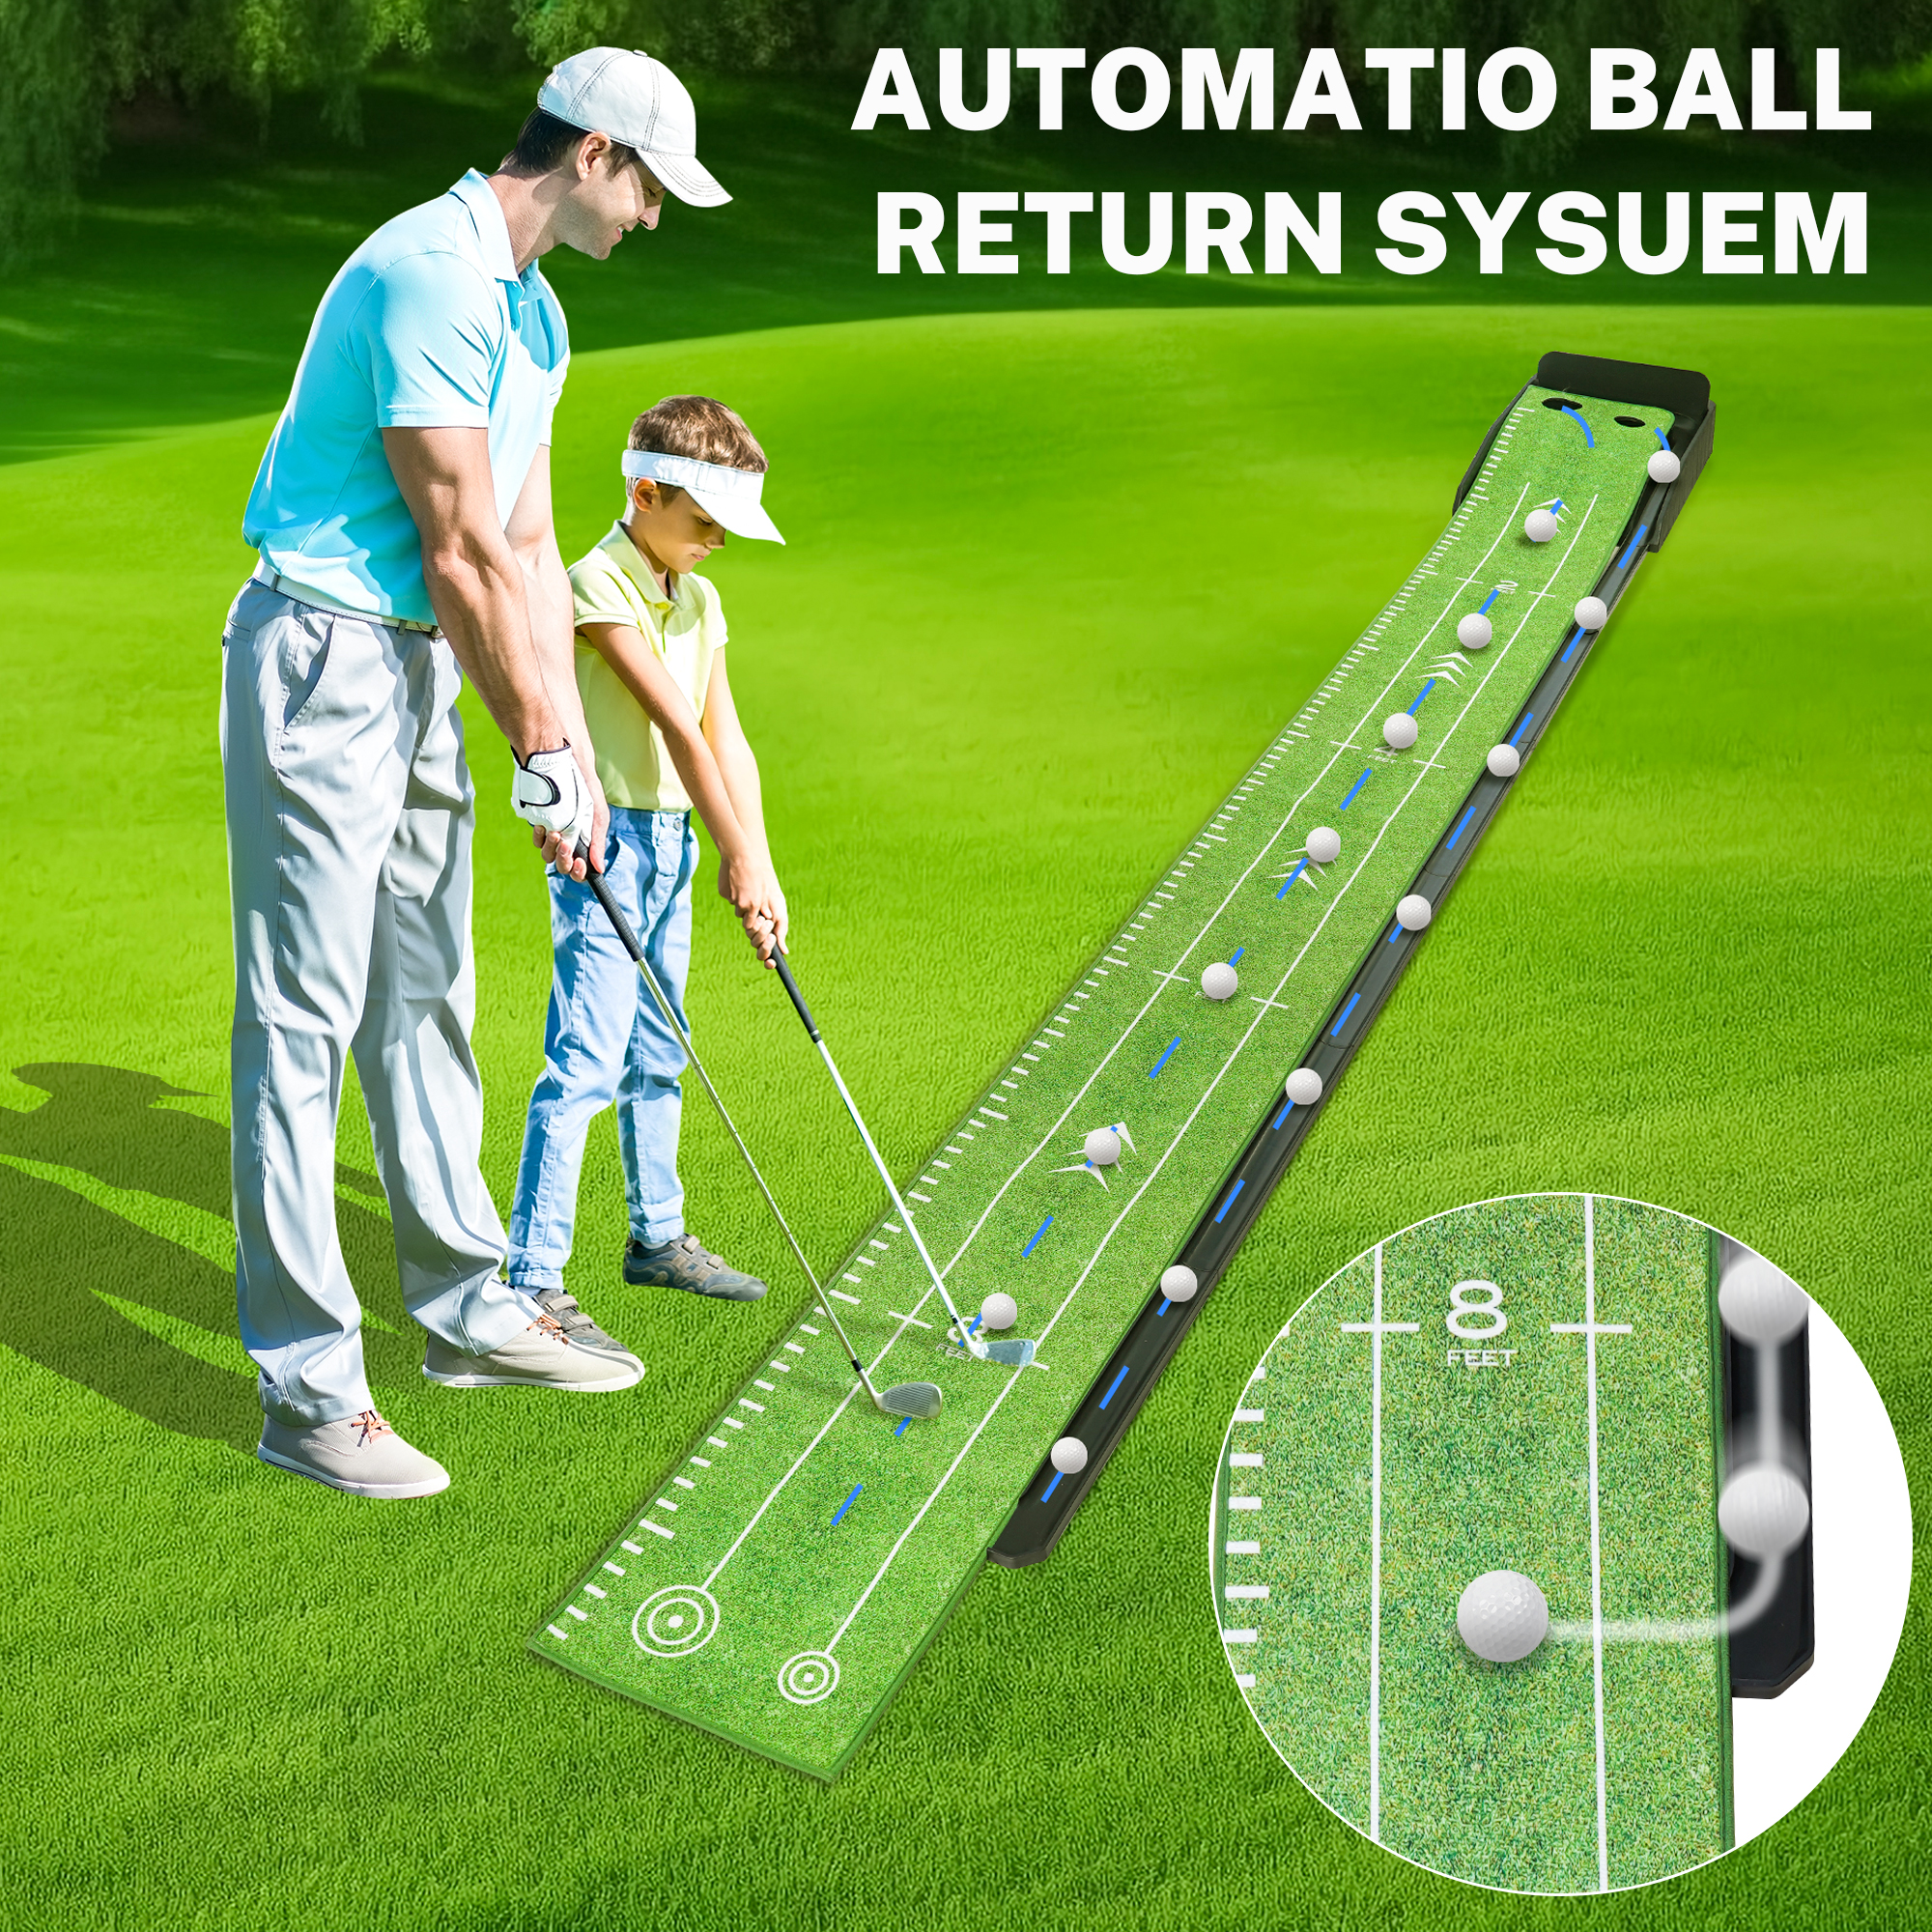 Segmart Putting Green Golf Mat for Indoors, Golf Training Bundles with 3 Bonus Balls, Improve Accuracy and Speed, Auto Ball Return, Indoor/Outdoor Practice Golf Accessories Golf Gift for Men - image 2 of 9